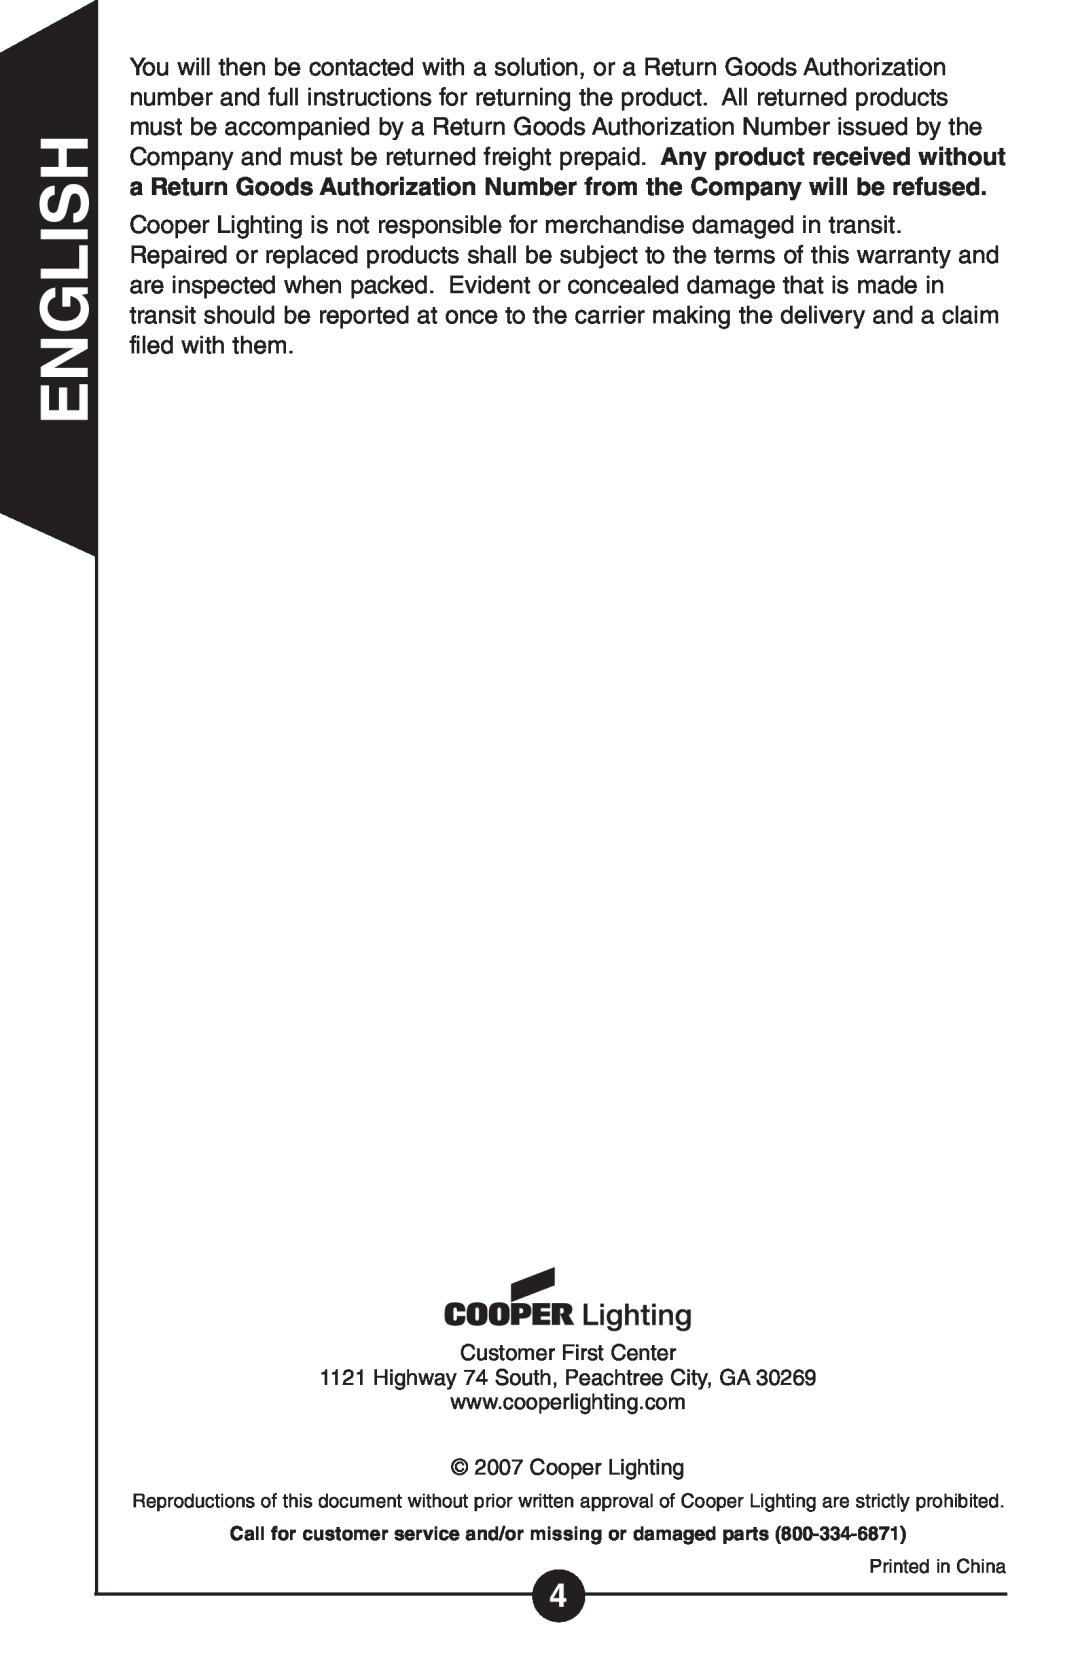 Cooper Lighting HS1R-C, Hs 1r instruction manual English, Customer First Center, Highway 74 South, Peachtree City, GA 